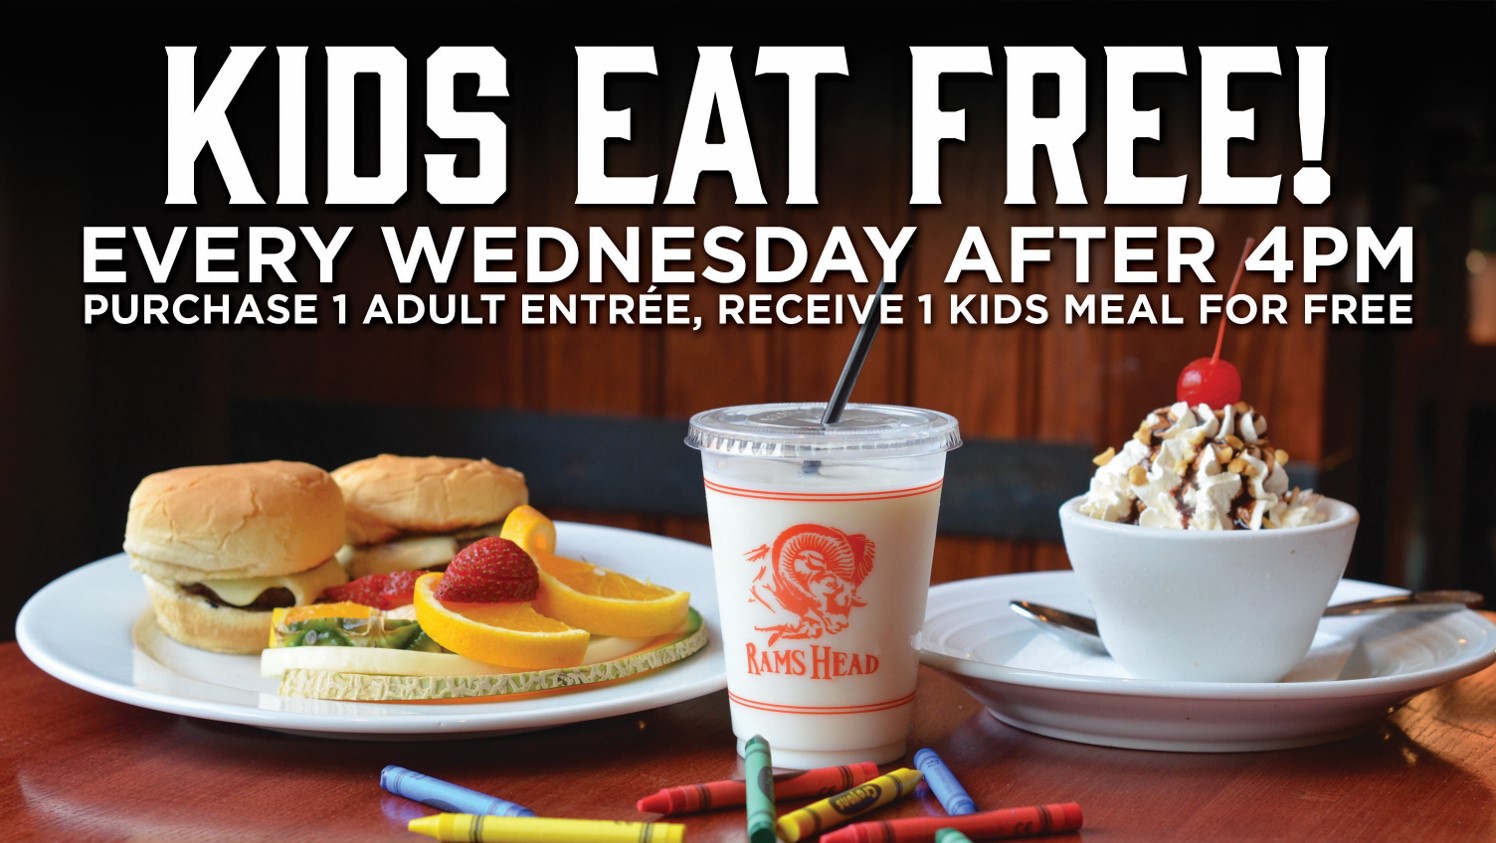 Kids Eat Free on Wednesdays at Rams Head Roadhouse